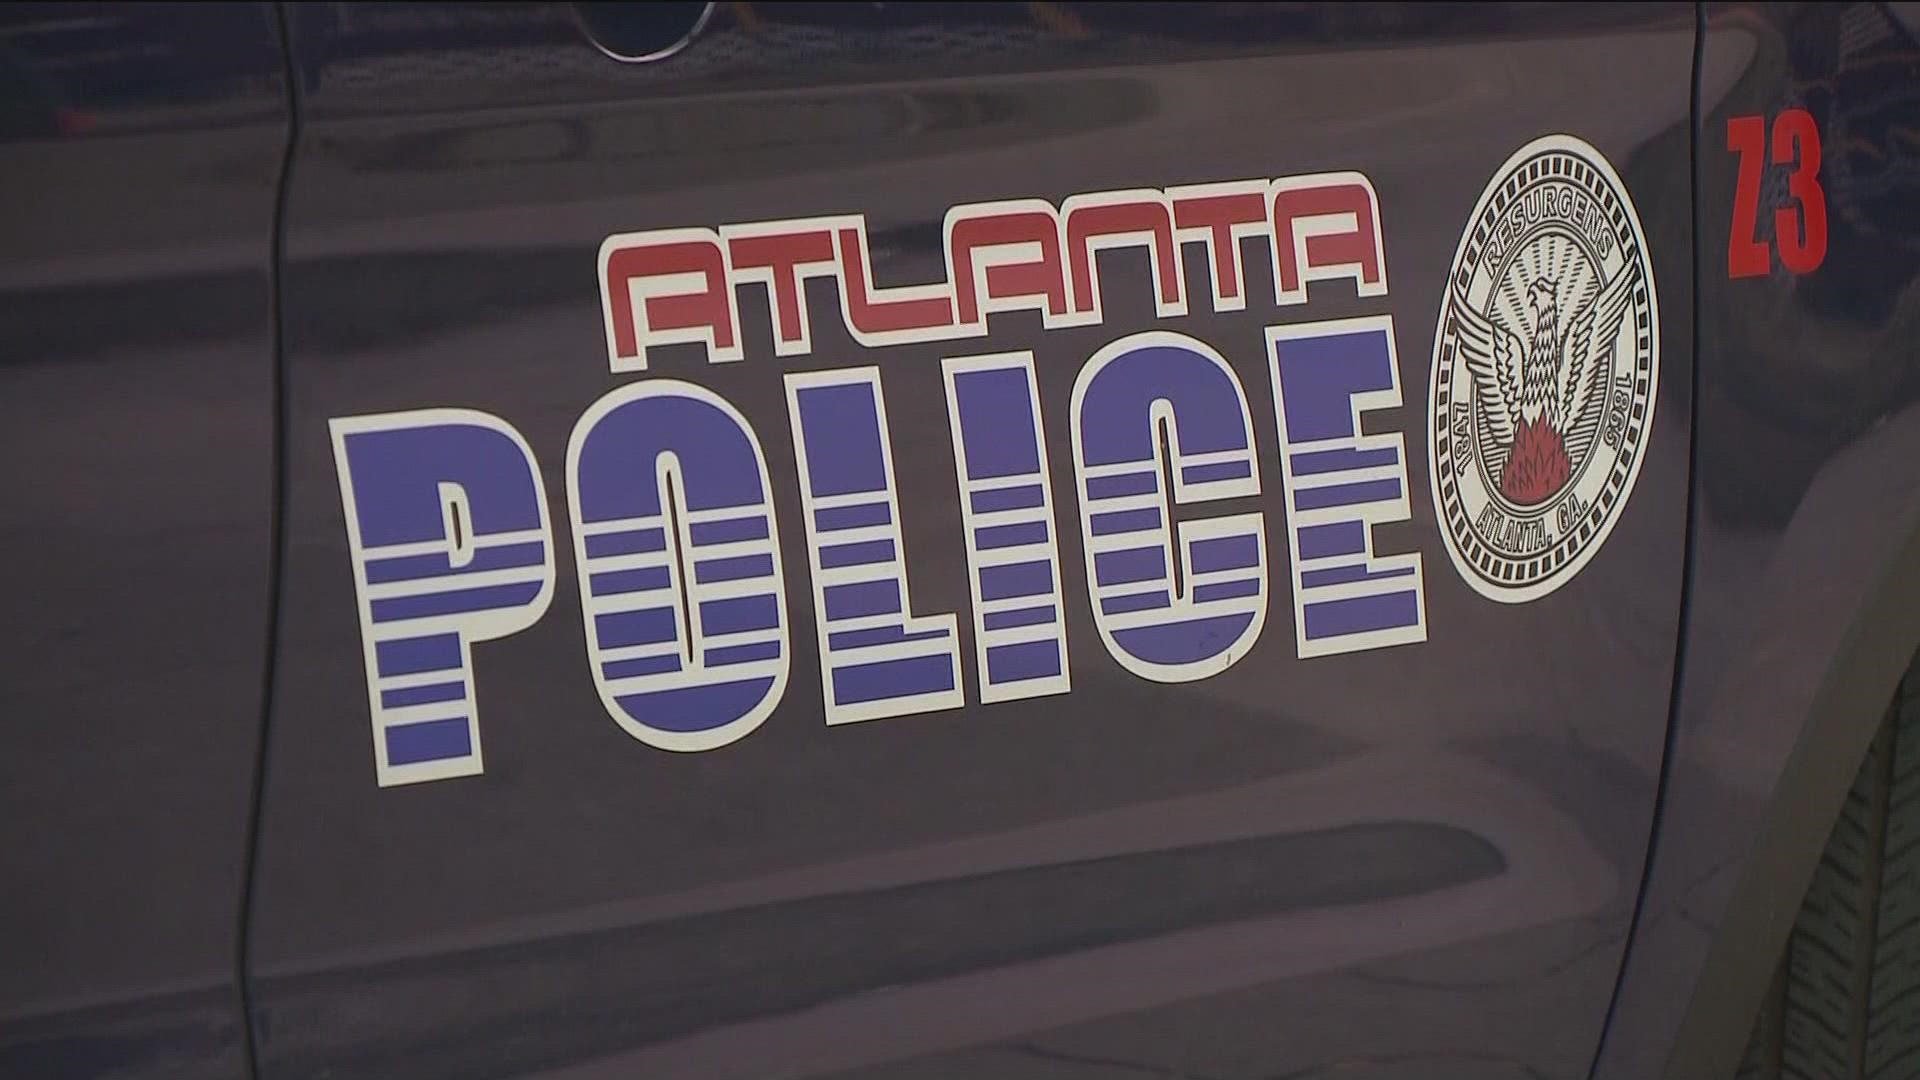 Atlanta's affluent Buckhead neighborhood has more recently become known as a hot spot for crime - but it's dropping.